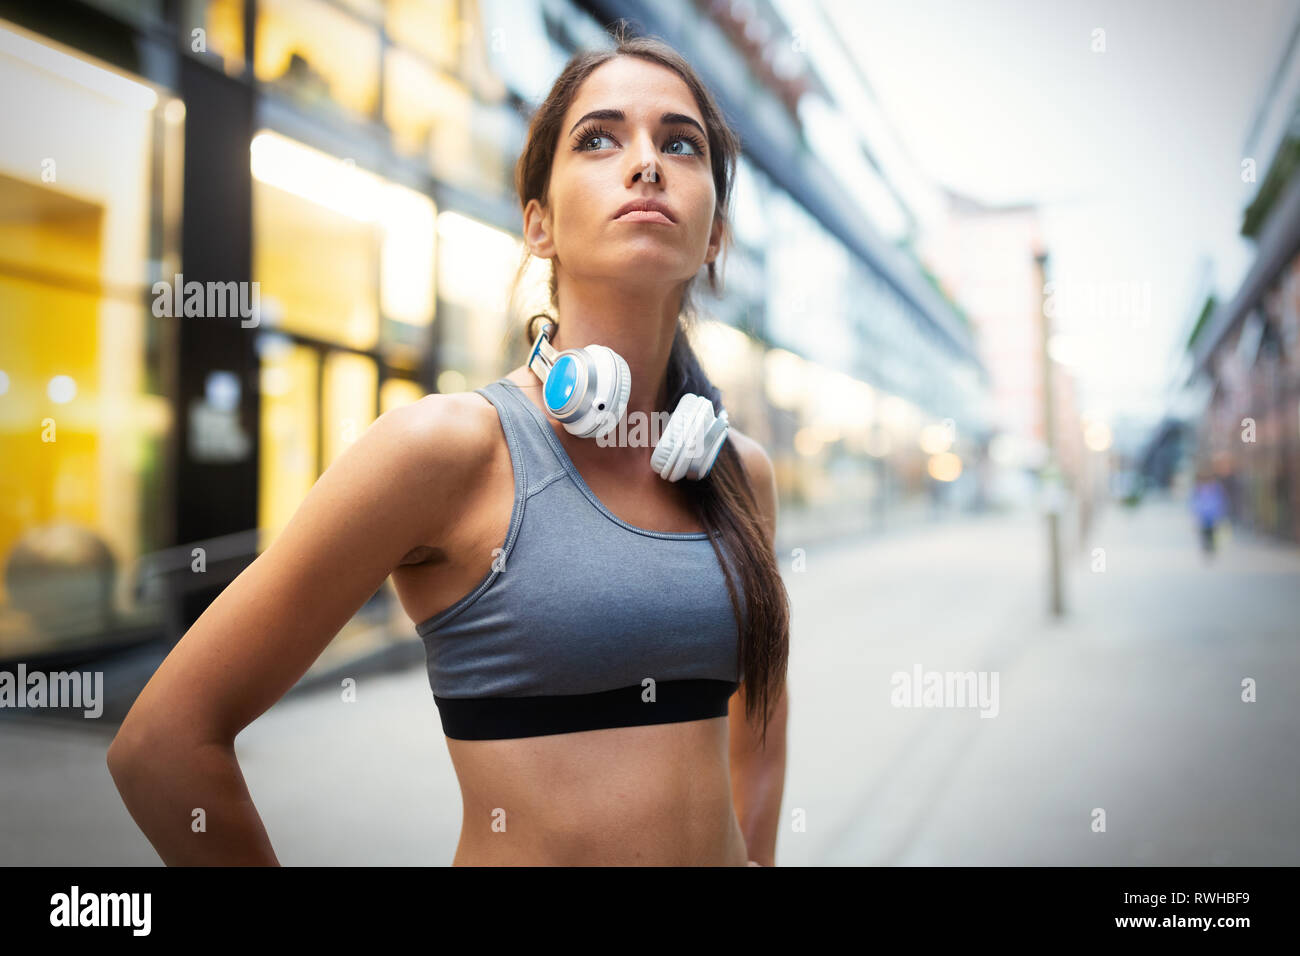 Young fit woman listening to music and working out by running Stock Photo